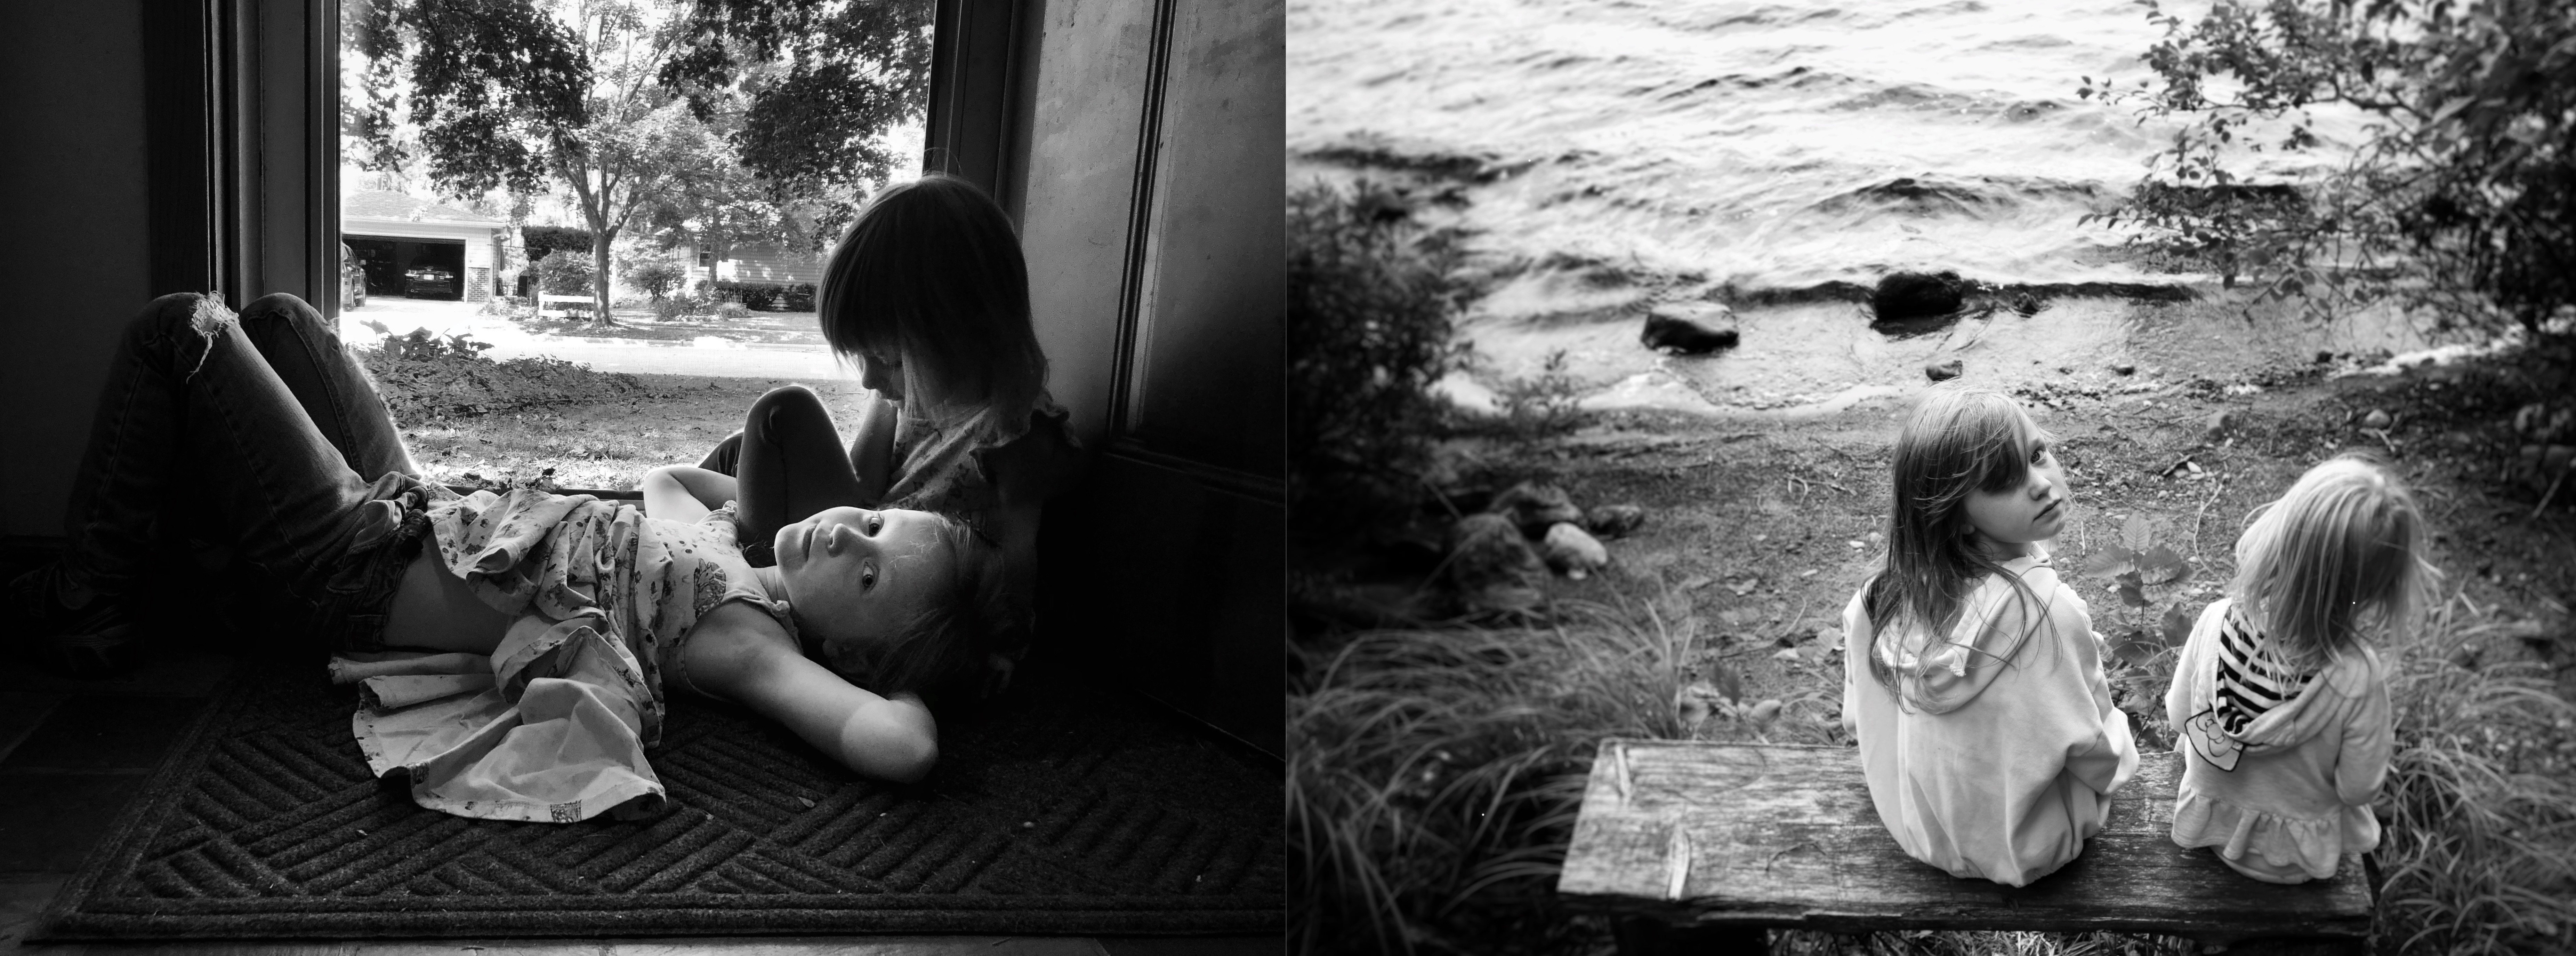 Diptych photograph of two black and white photos of two young white girls one side in a doorway and the second on a shore